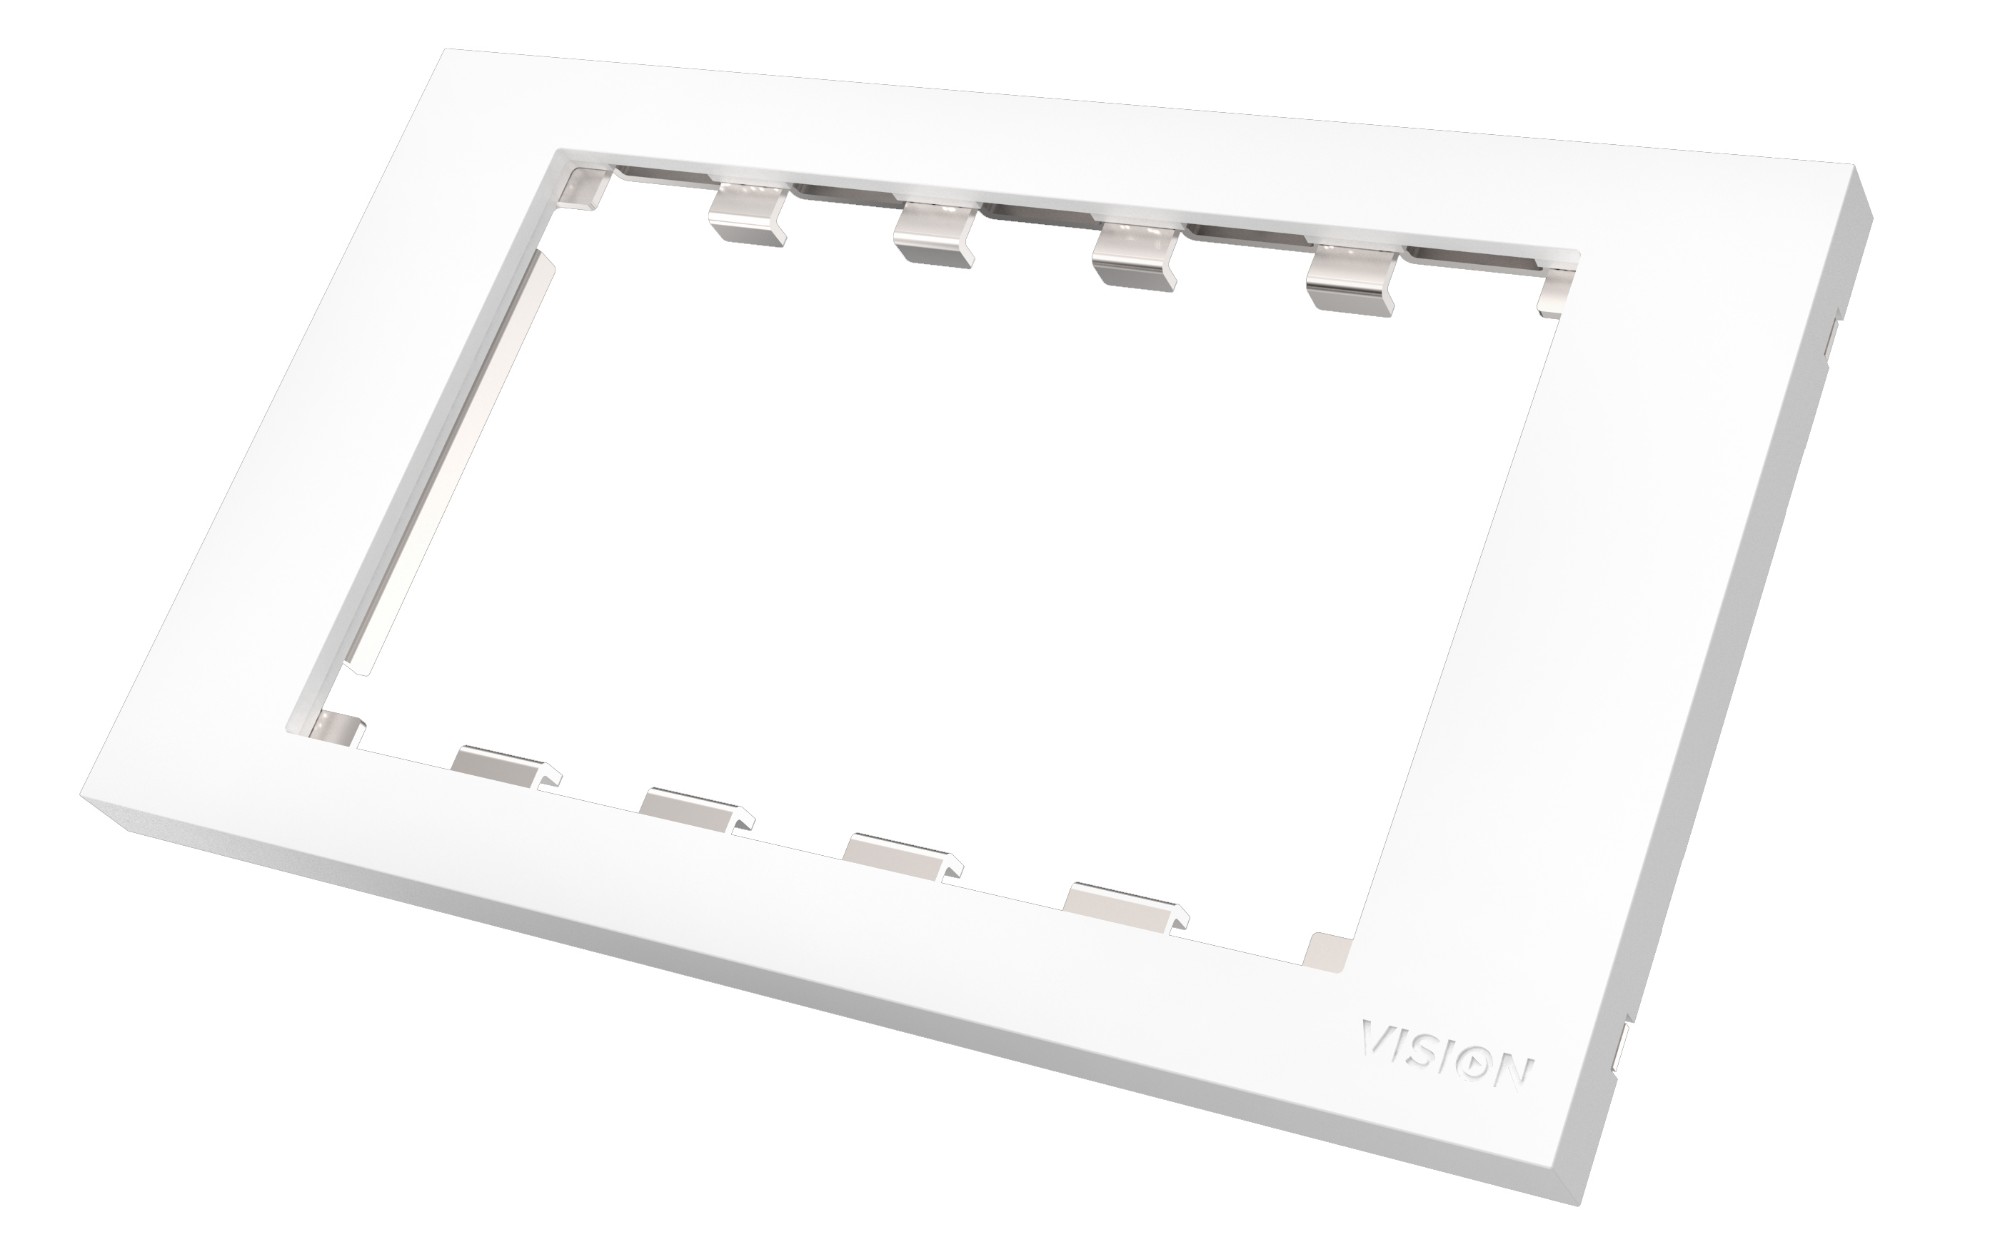 TC3 SURR2G VISION Techconnect Modular AV Faceplate - LIFETIME WARRANTY - Double-Gang UK surround - frame which accommodates 5 modules - fits to TC3 BACKBOX2G, TC3 BACKBOX2GT, or TC2 MUDRING2G, or any standard double-gang UK backbox (pattress) 146 x 86mm / 5.8 x 3.4